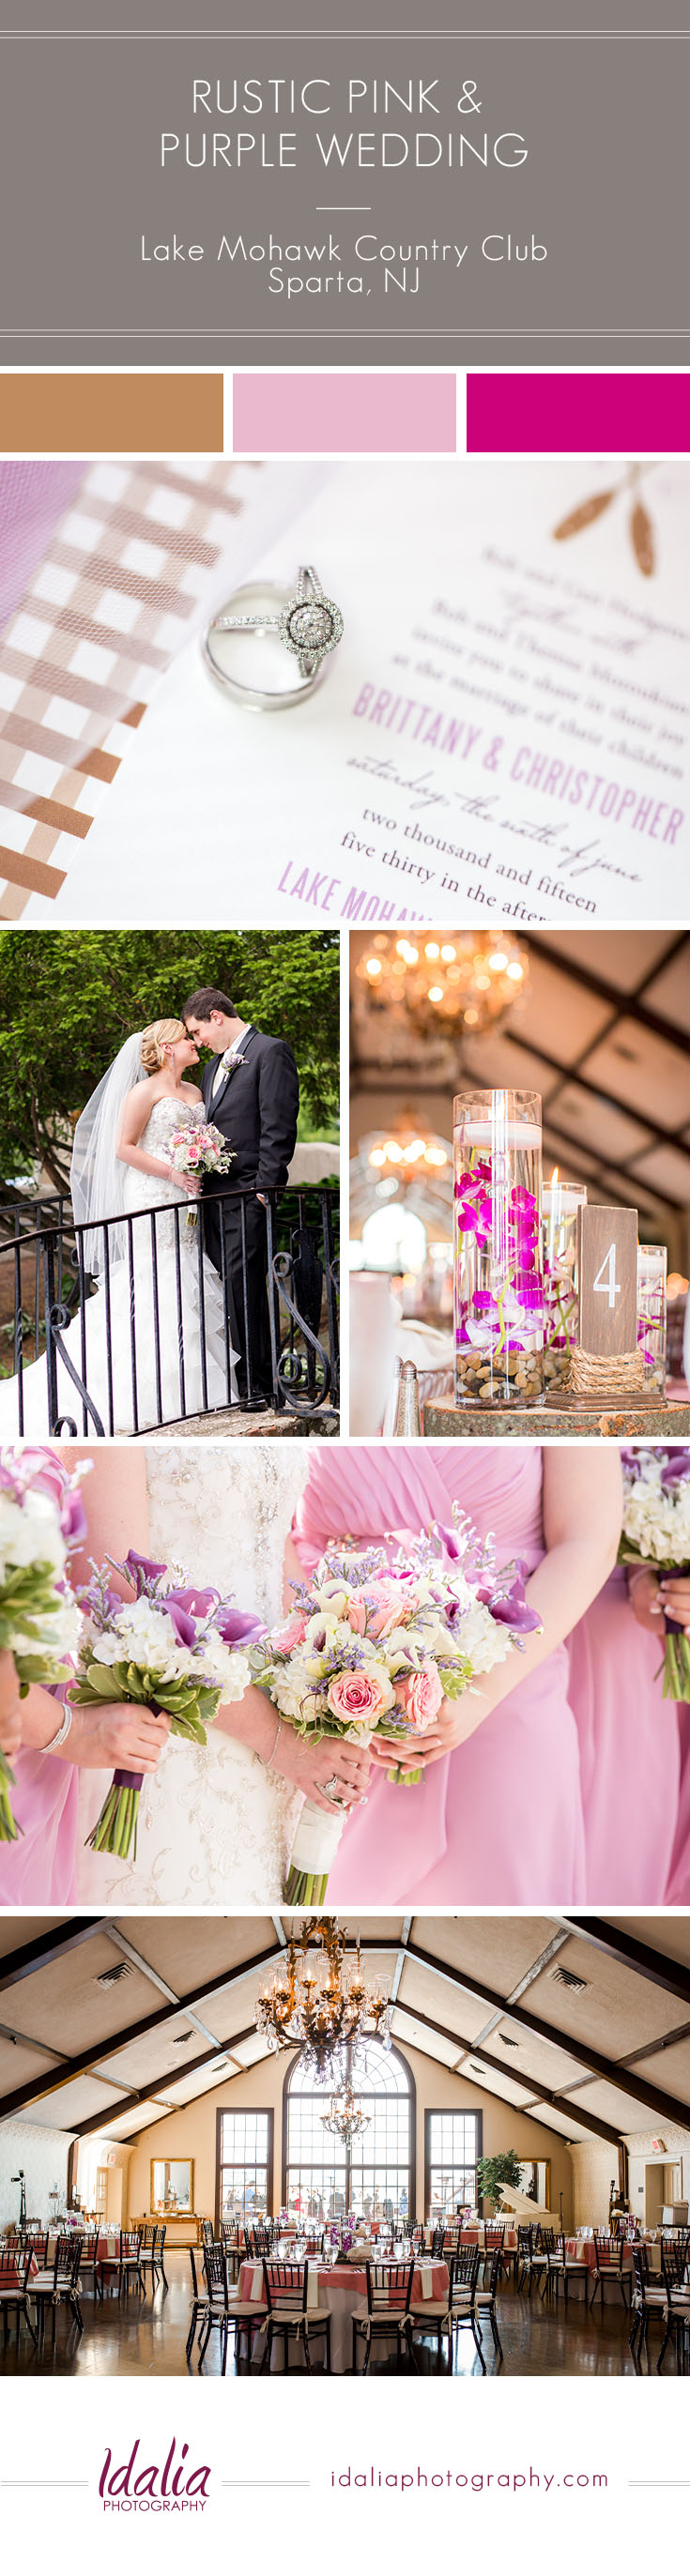 Rustic Pink and Purple Wedding